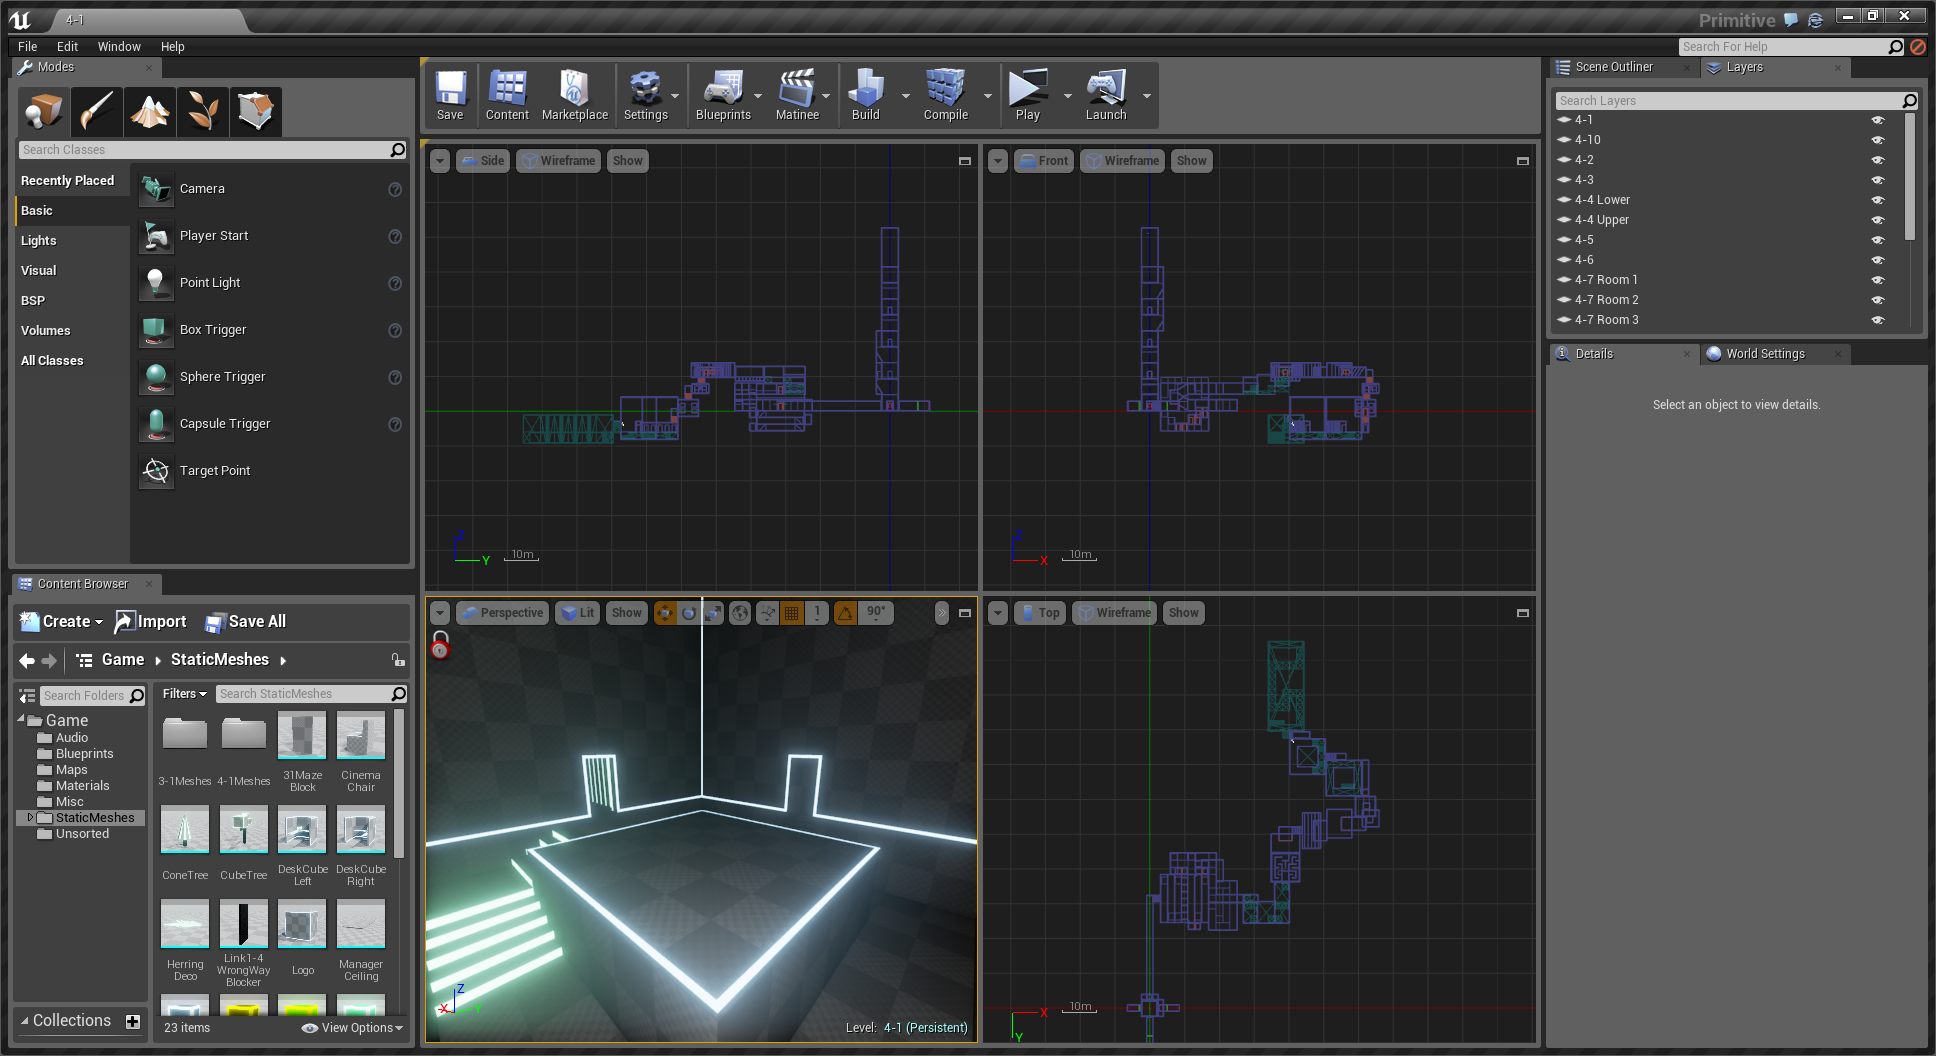 ue4editor2015-01-0300iouo5.png